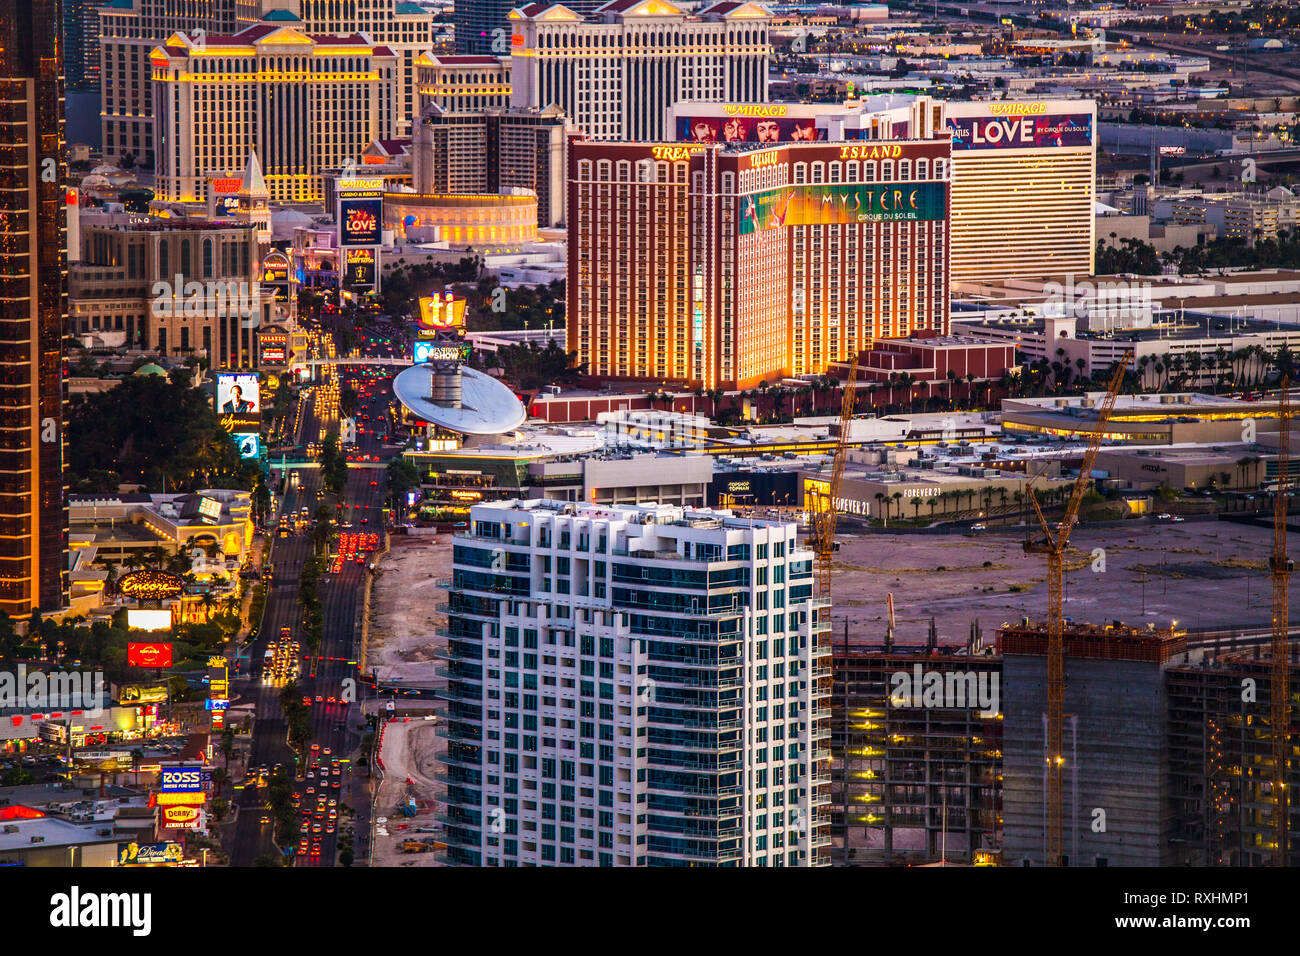 LAS VEGAS, NEVADA - MAY 15, 2018: View across the city of Las Vegas Nevada at night with lights and many hotel resorts and casinos in view Stock Photo